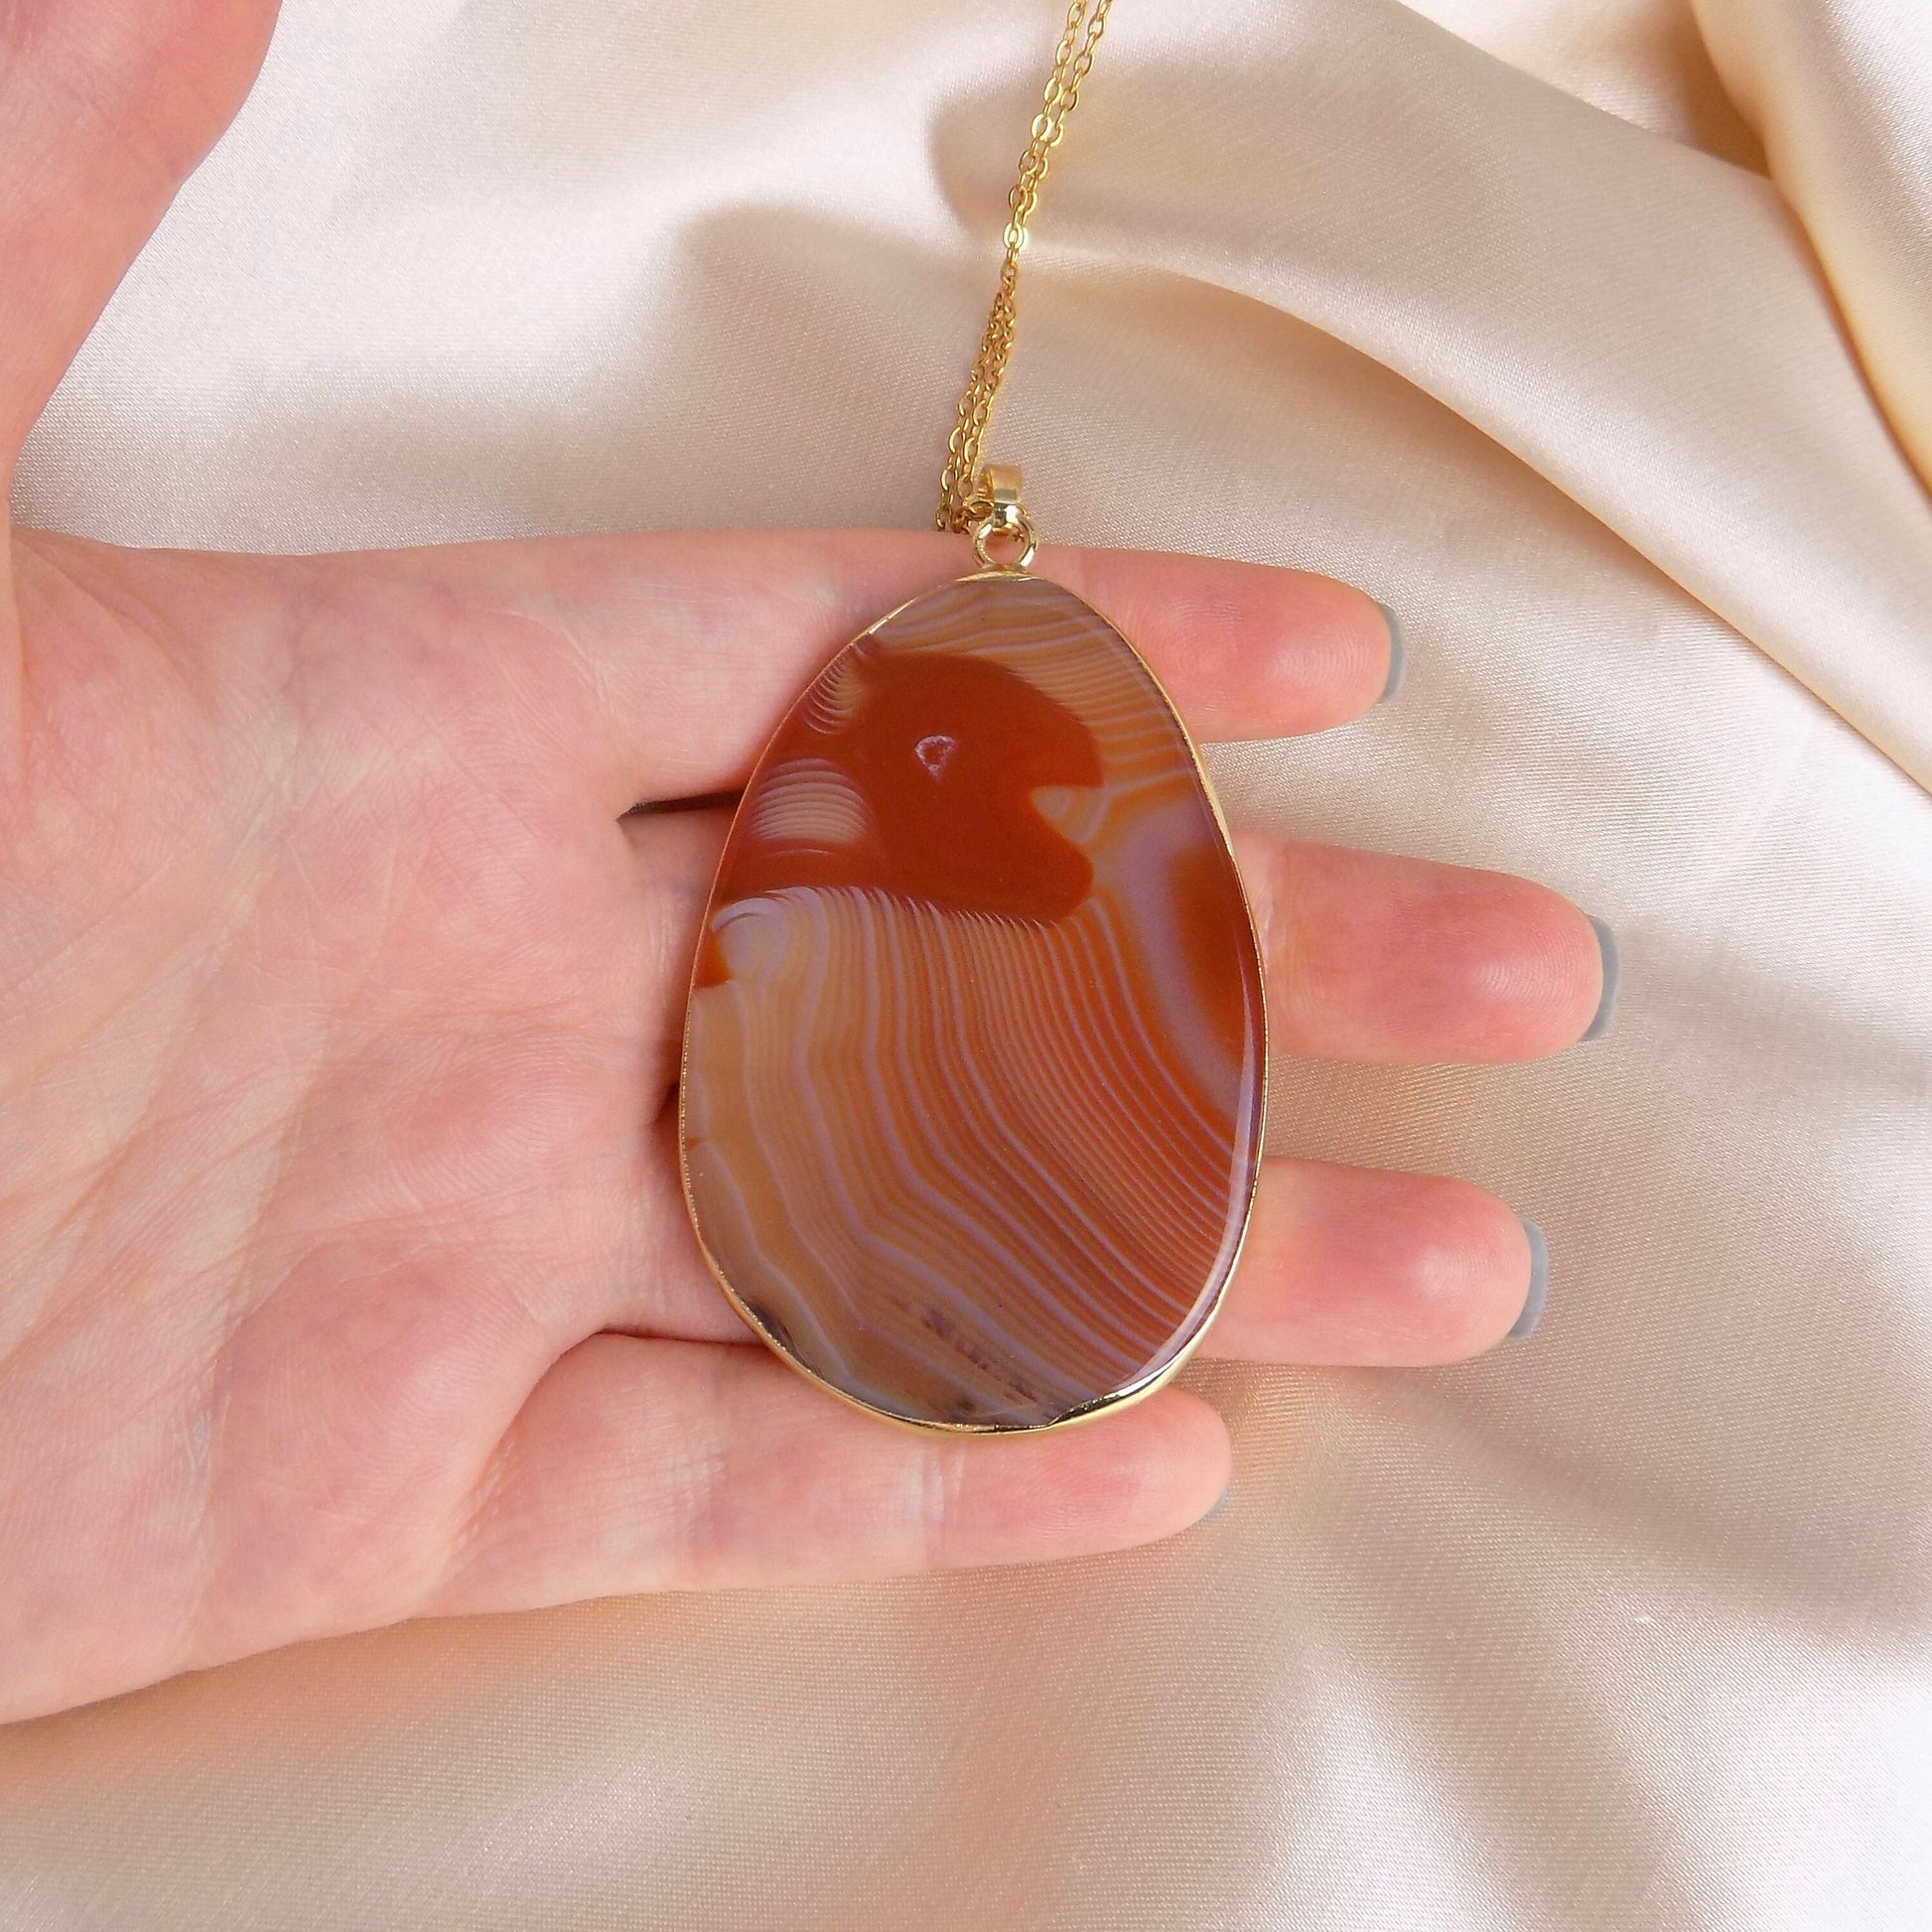 Extra Large Agate Necklace Gold, Orange Brown Agate Slice, Boho Long Layer, Gift For Mom, G15-06